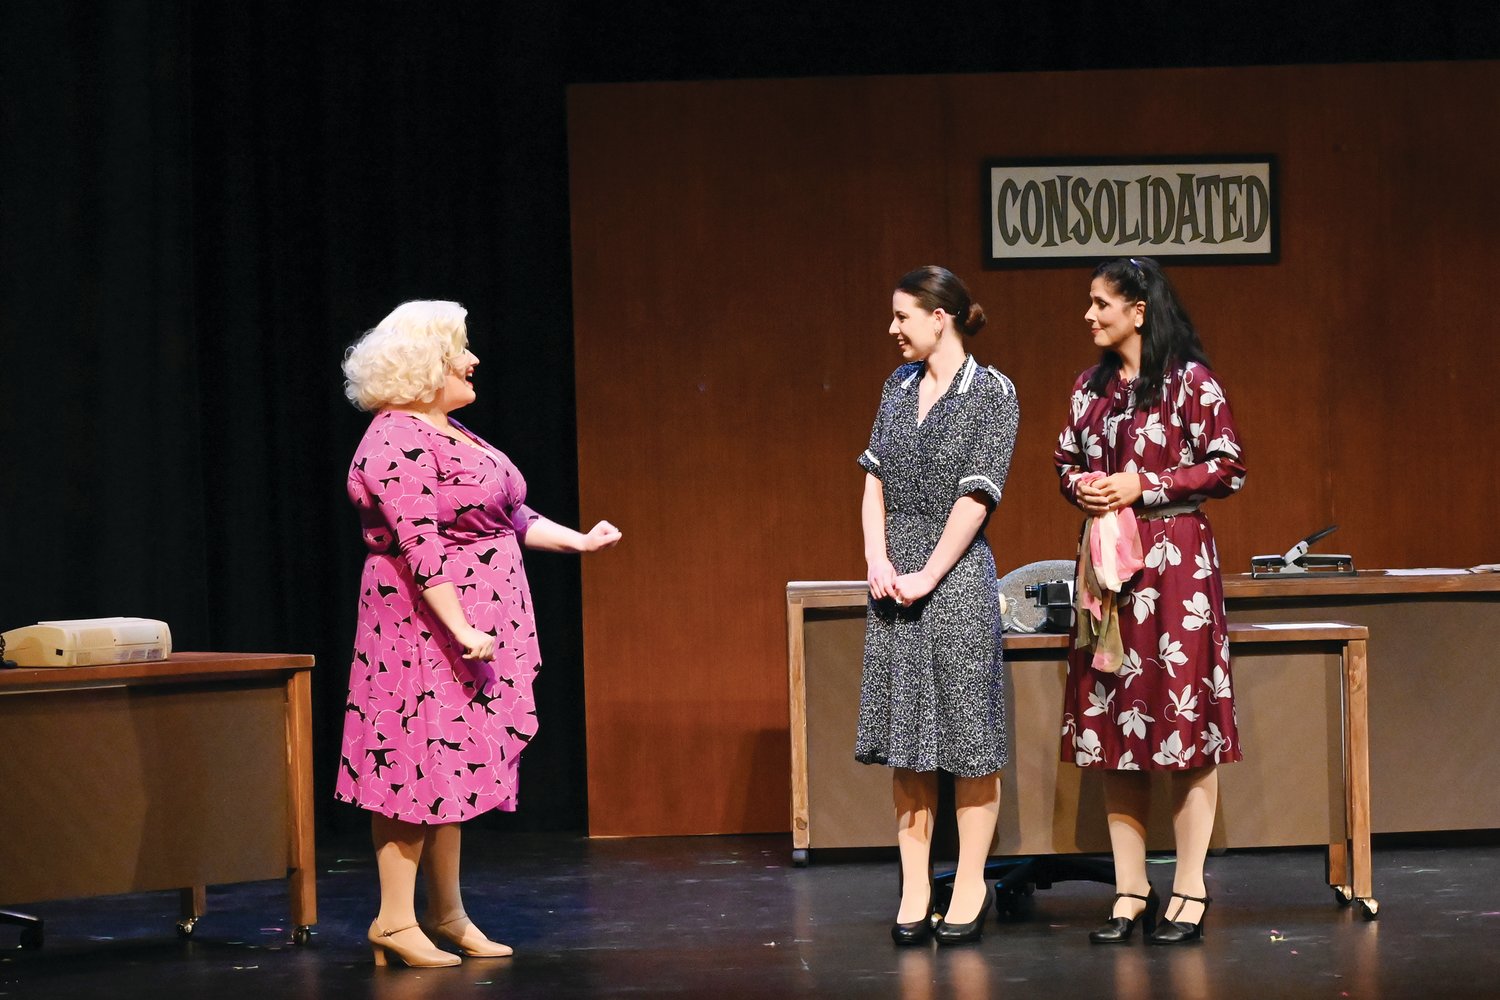 UNLIKELY FRIENDS: Three coworkers at Consolidated Industries become unlikely friends and seek revenge on their boss. From left: Kaelyn Boss of Glocester as Doralee, Becky Minda of Providence as Judy, and Lia Del Sesto McAlpine of Cranston as Violet.